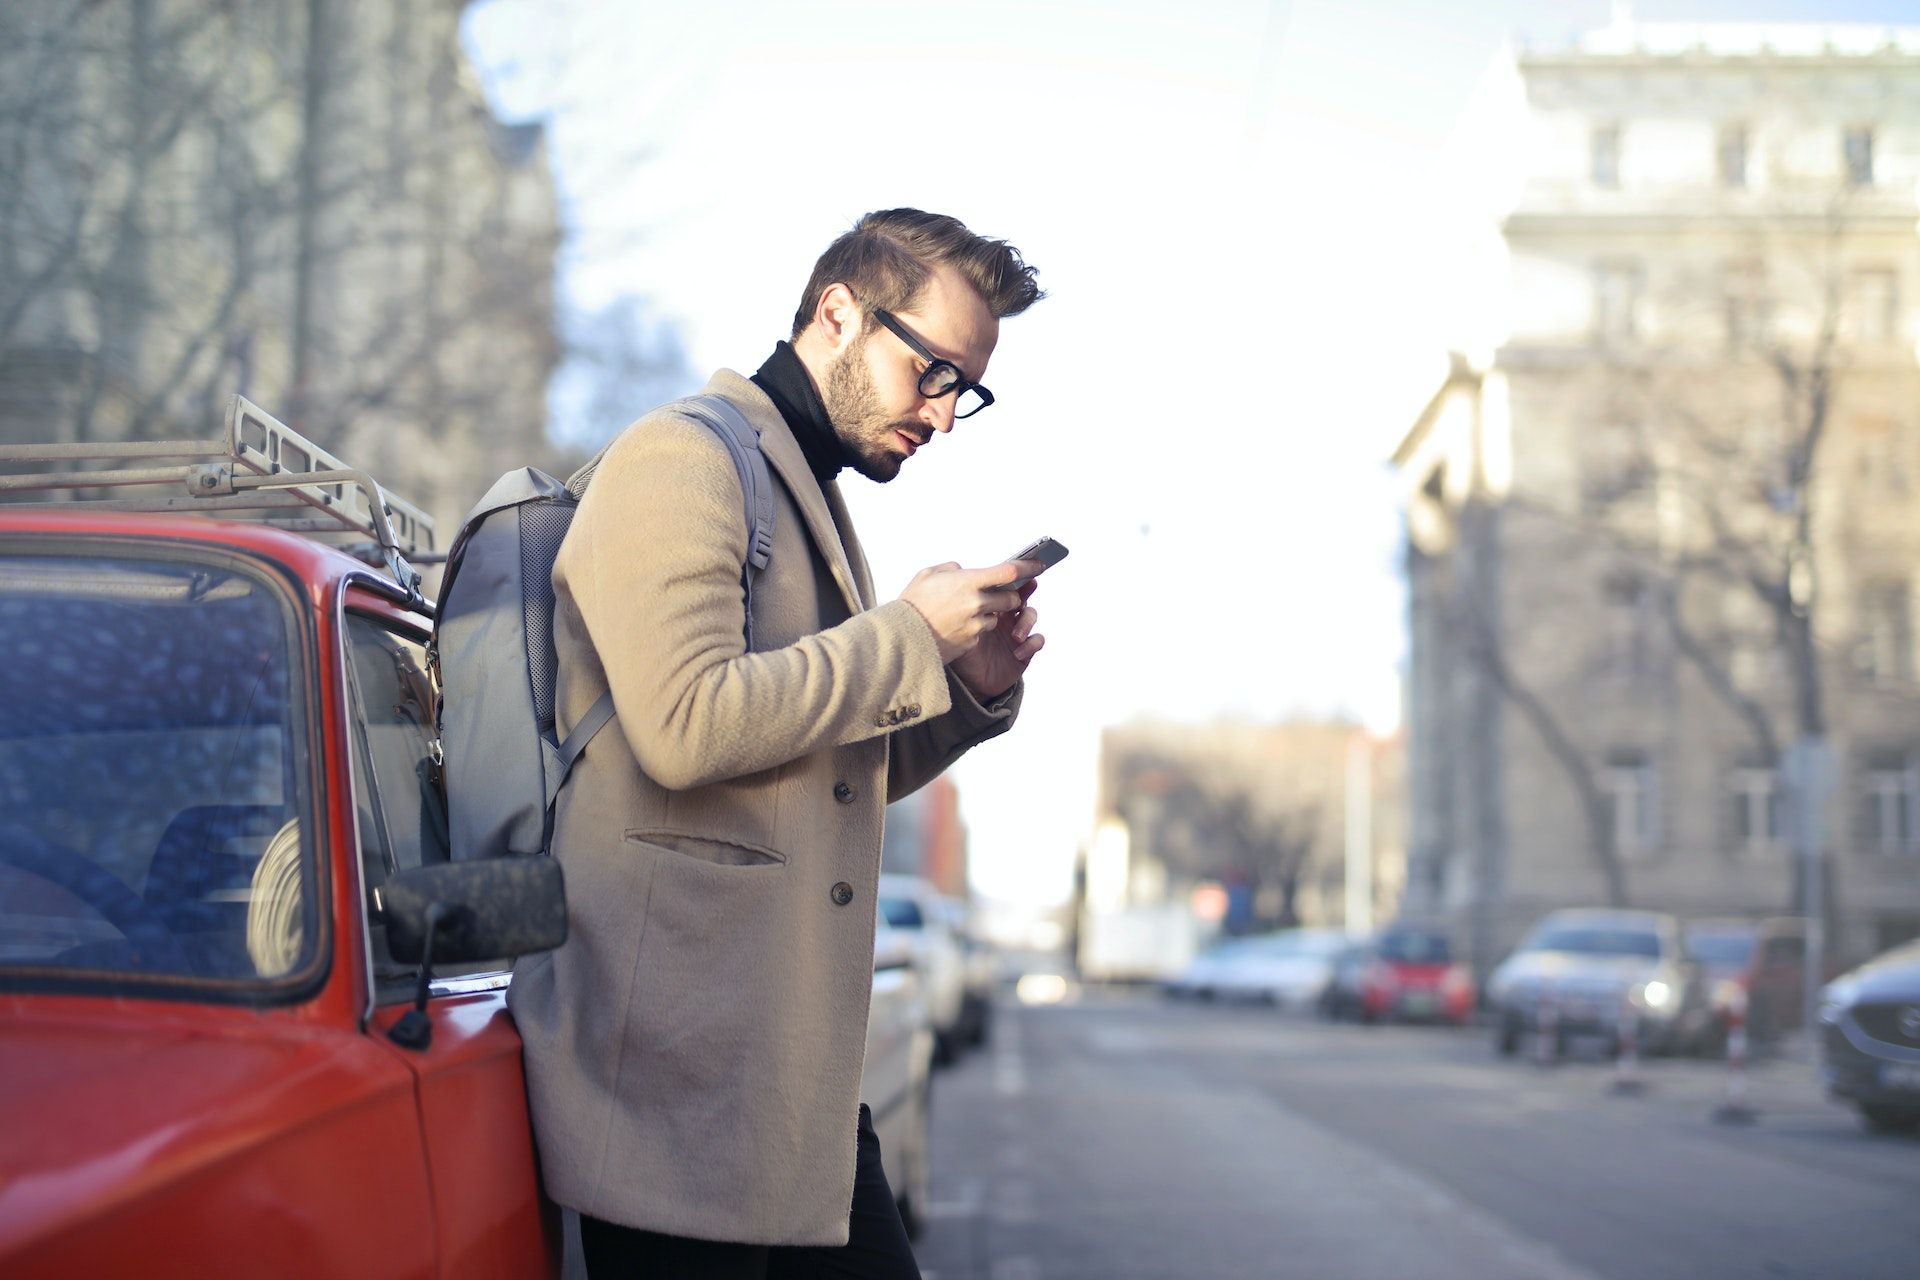 Man in Beige Coat Holding Phone Leaning on Red Vehicle